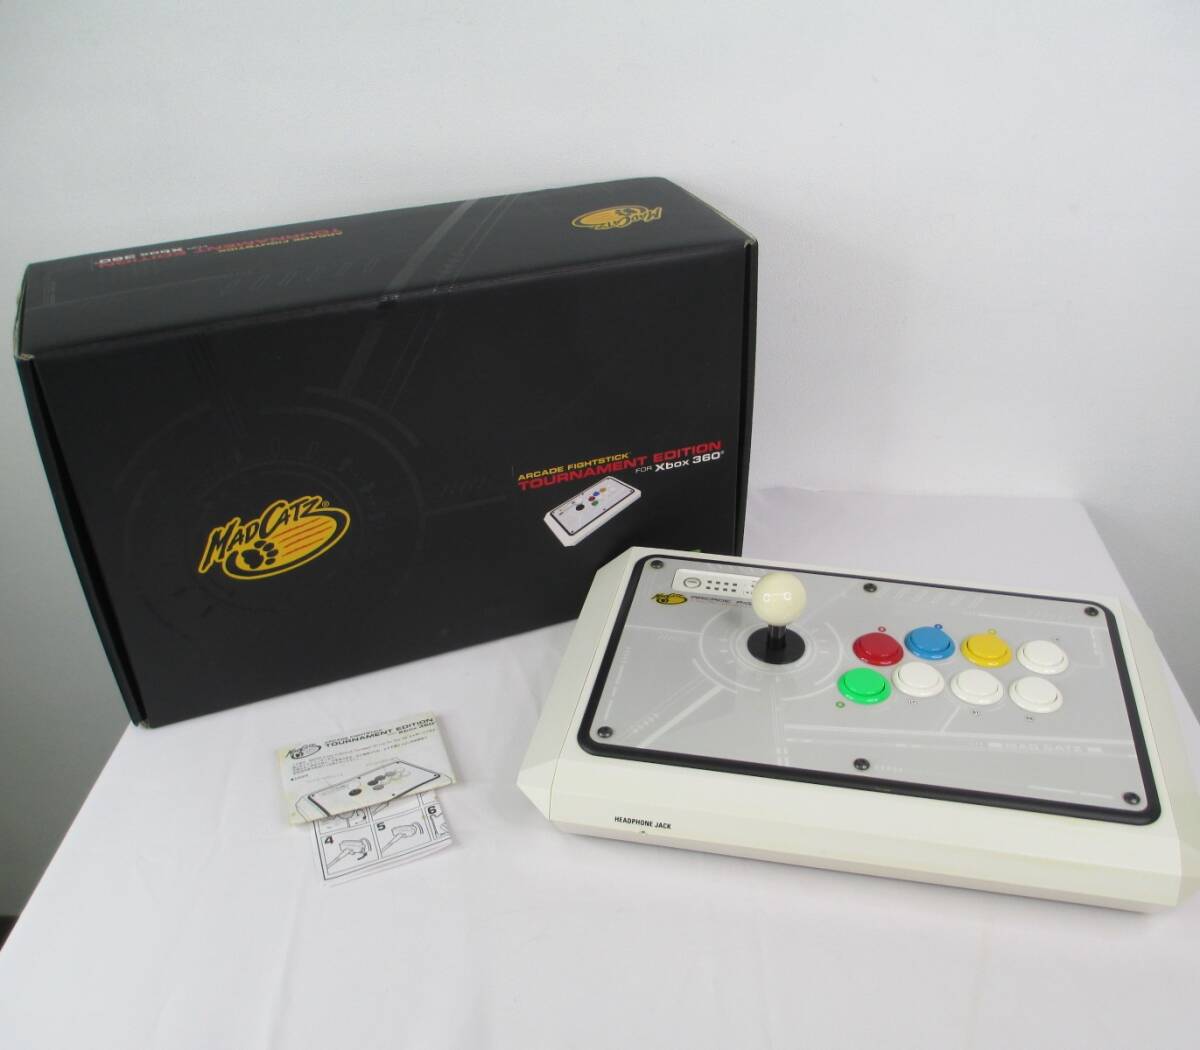 C-4[ used ]⑩ MAD CATZ mud Cat's tsu arcade faito stick to-na men to edition for Xbox360 including in a package possible 